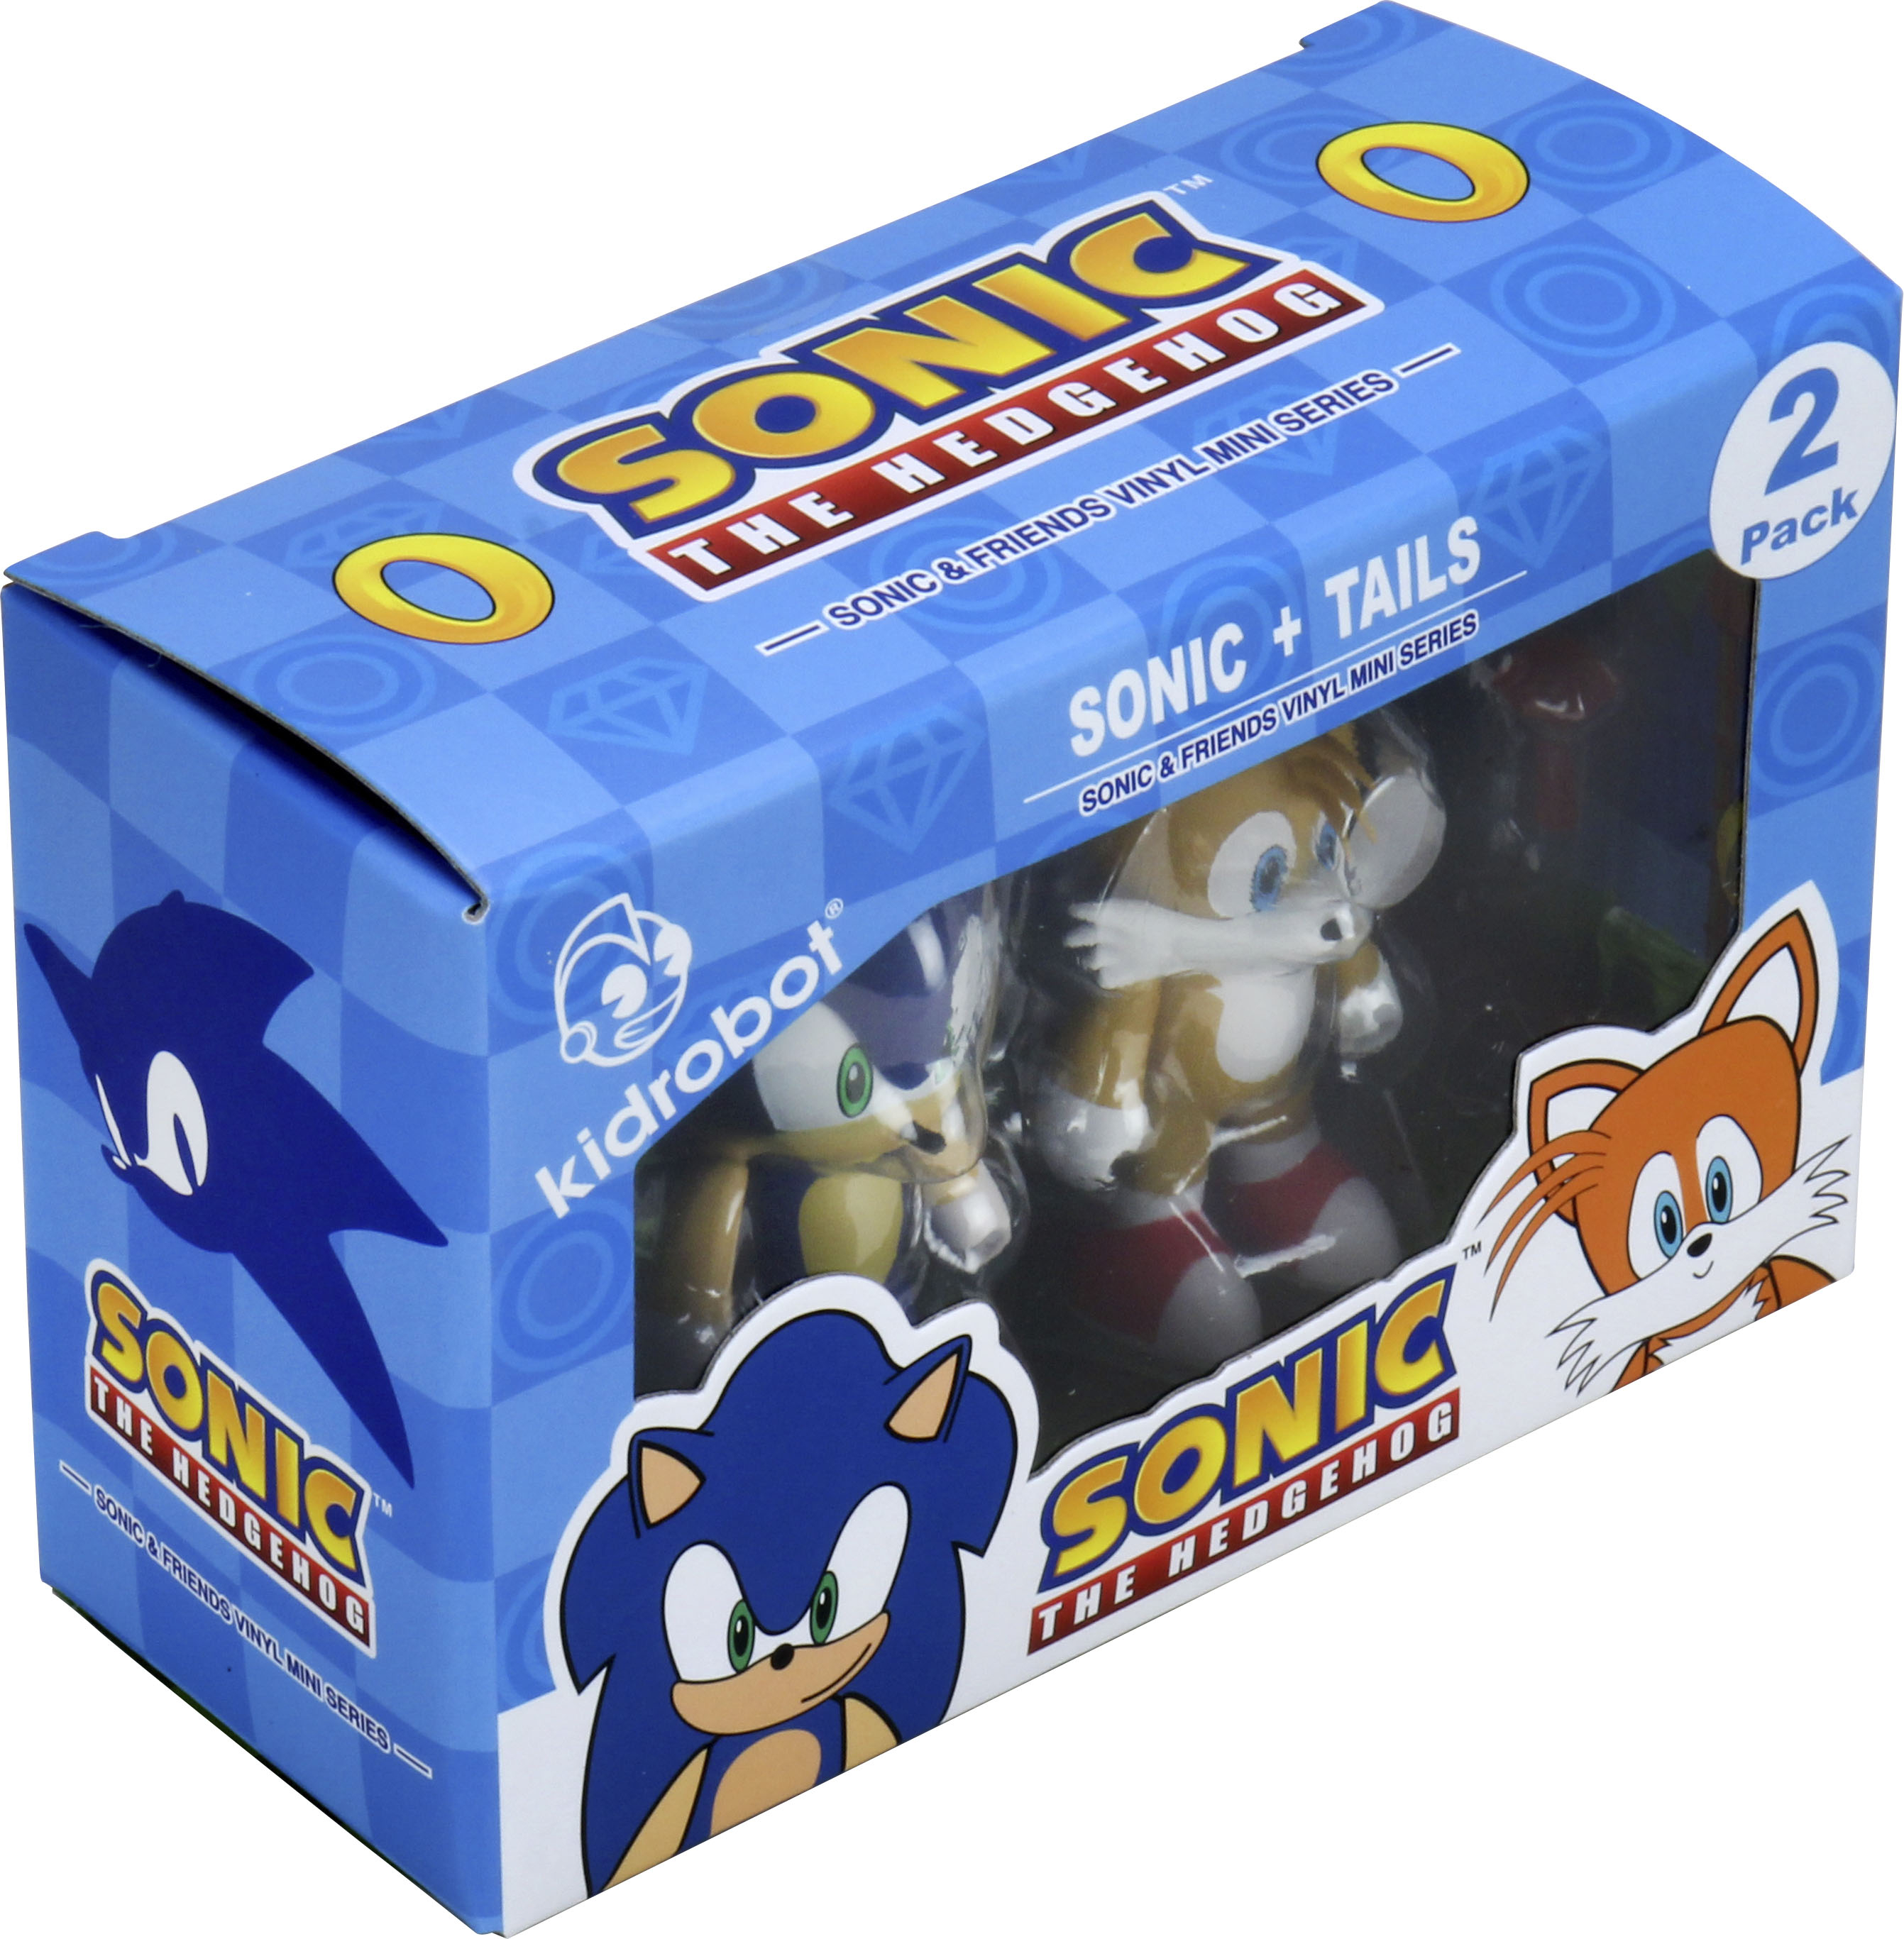 Sonic 2 The Hedgehog 8 Pack Action Figures 